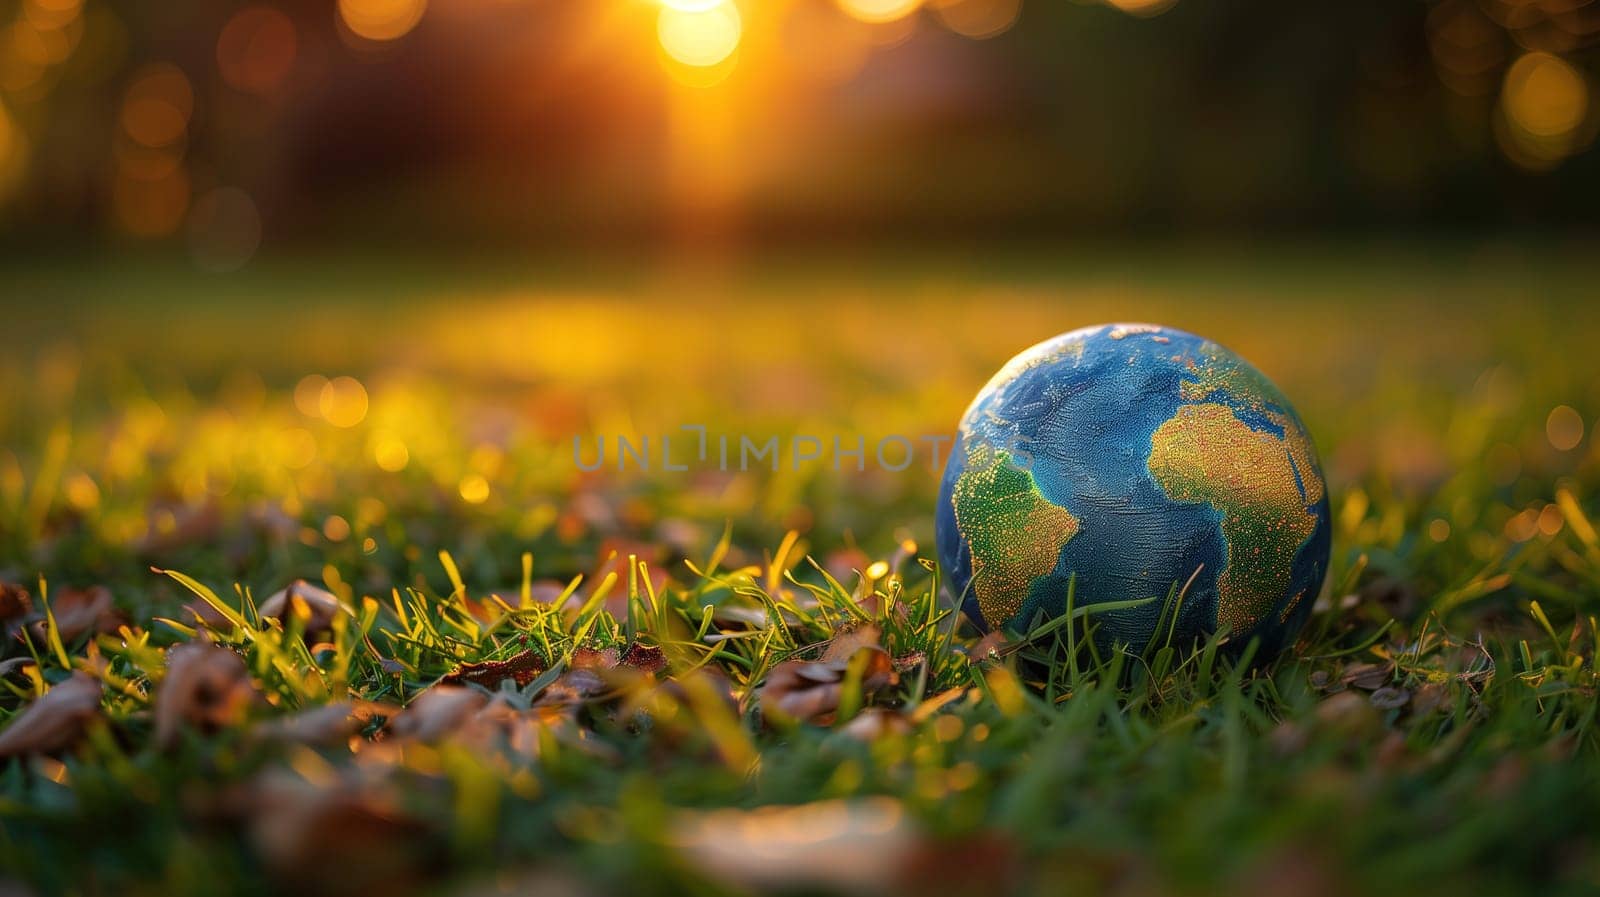 Small Globe Resting on Green Grass With Sunset Light Shining Through, Symbolizing Earth Day by TRMK